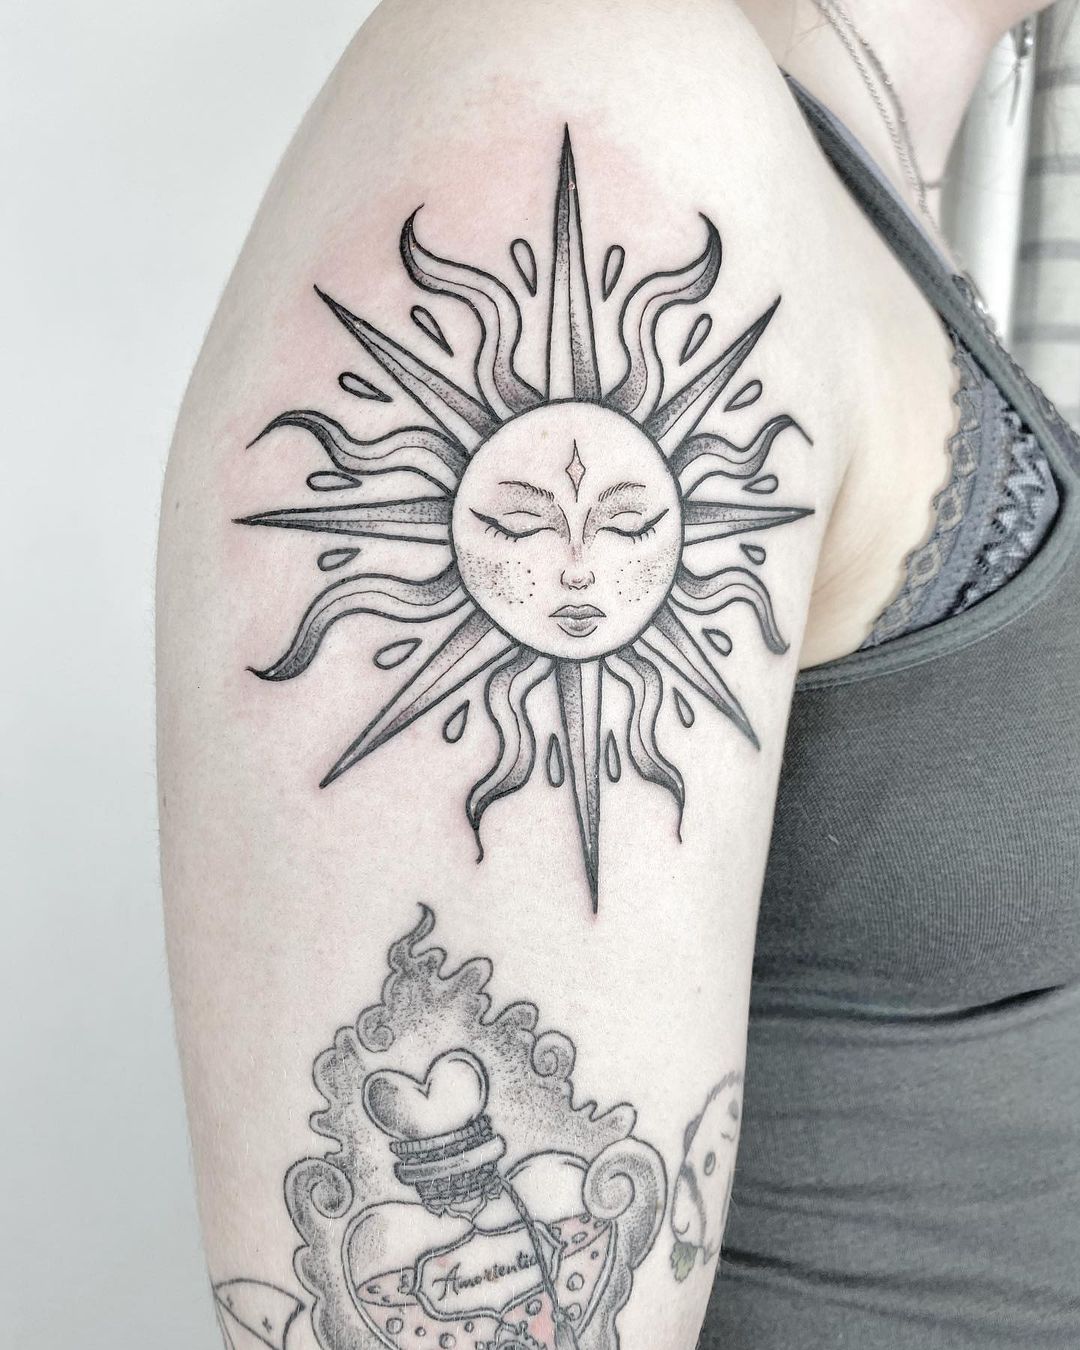 Sun Meaning Tattoo: The Intricate Meanings Behind Popular Tattoo Styles and Symbols.